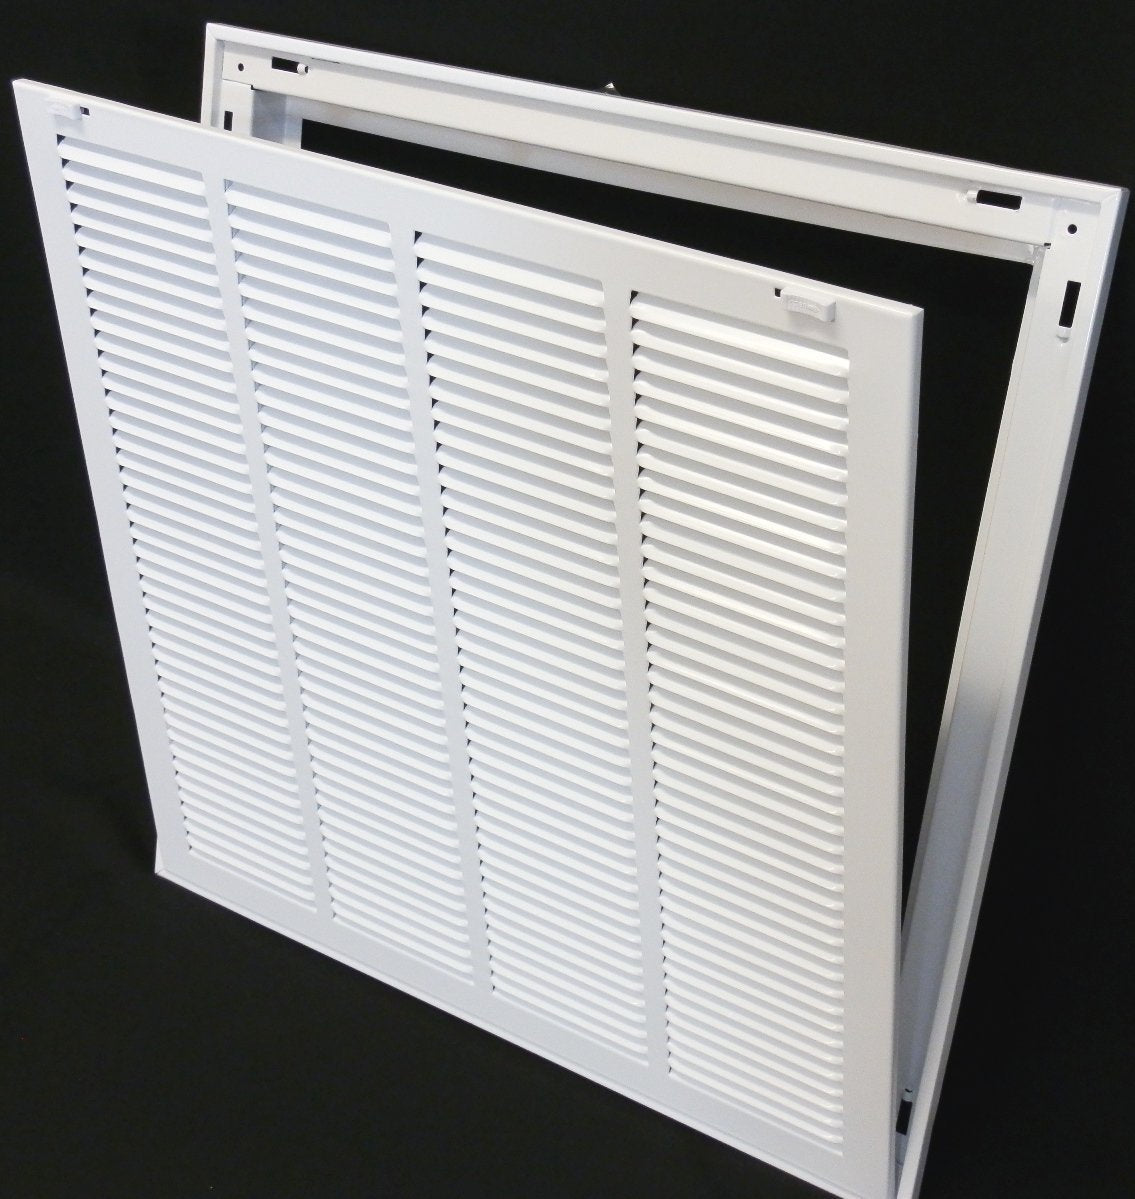 26&quot; X 20&quot; Steel Return Air Filter Grille for 1&quot; Filter - Removable Frame - [Outer Dimensions: 28 5/8&quot; X 22 5/8&quot;]